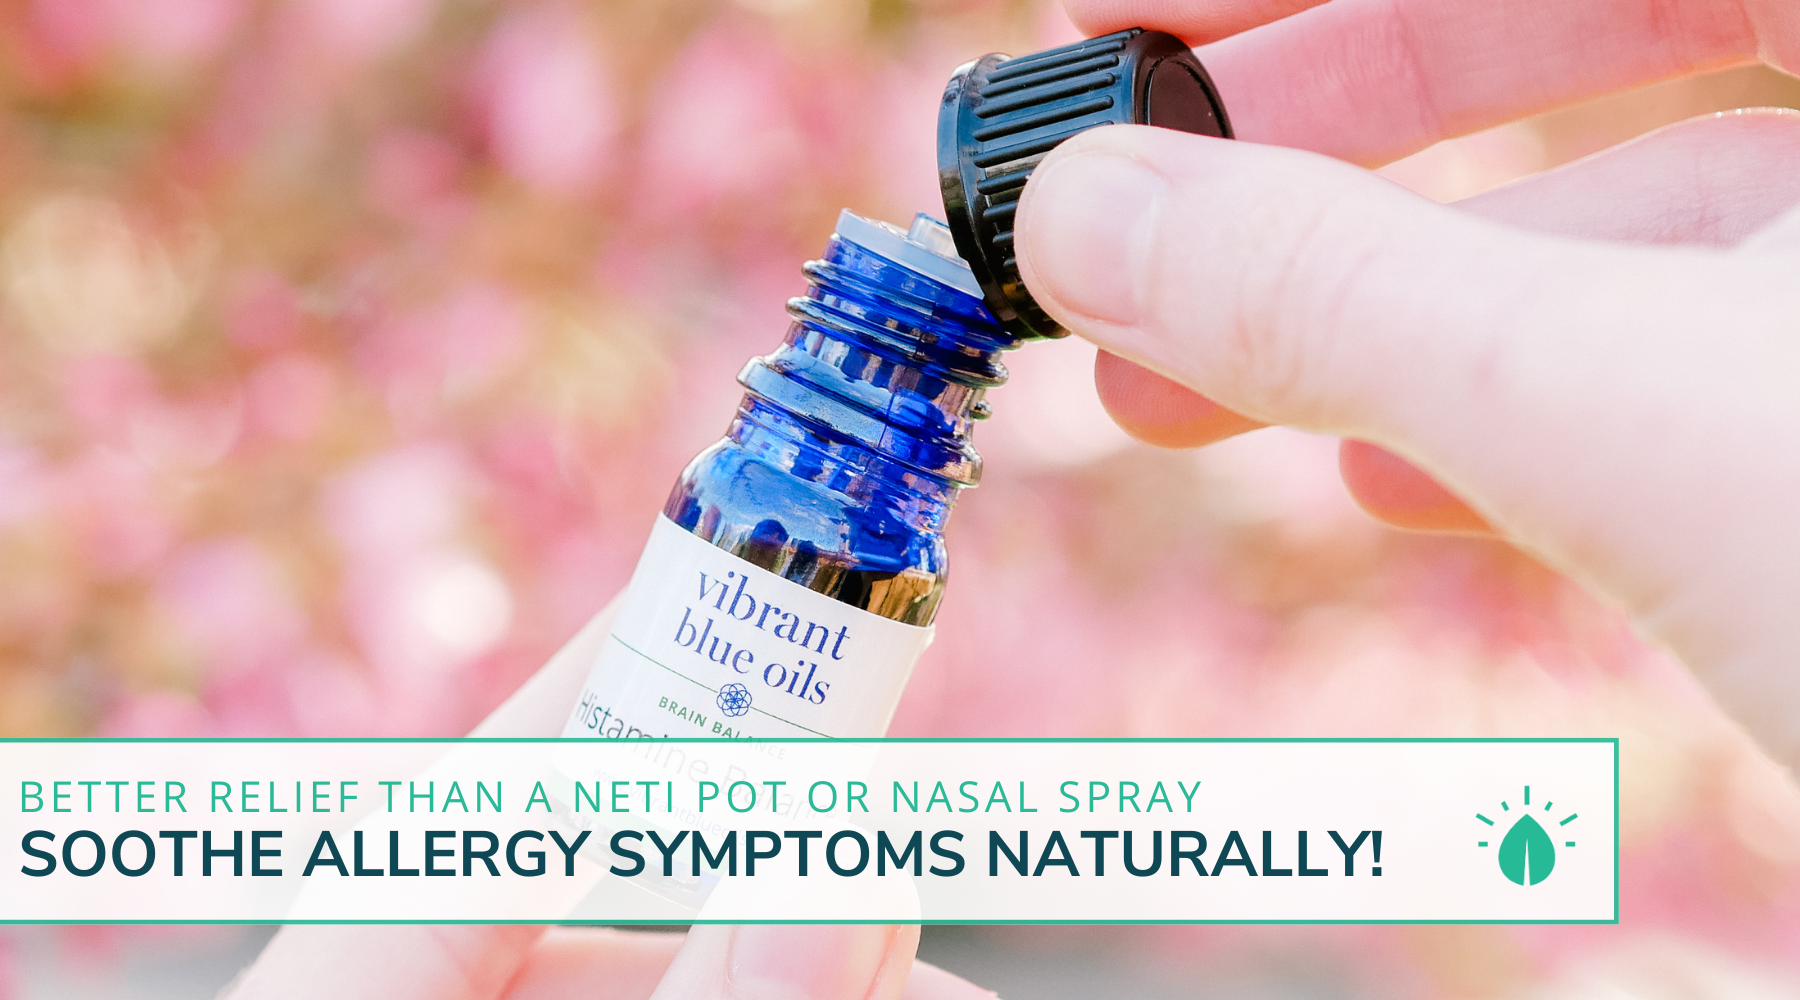 Soothe Allergy Symptoms Naturally! Better Relief Than A Neti Pot Or Nasal Spray